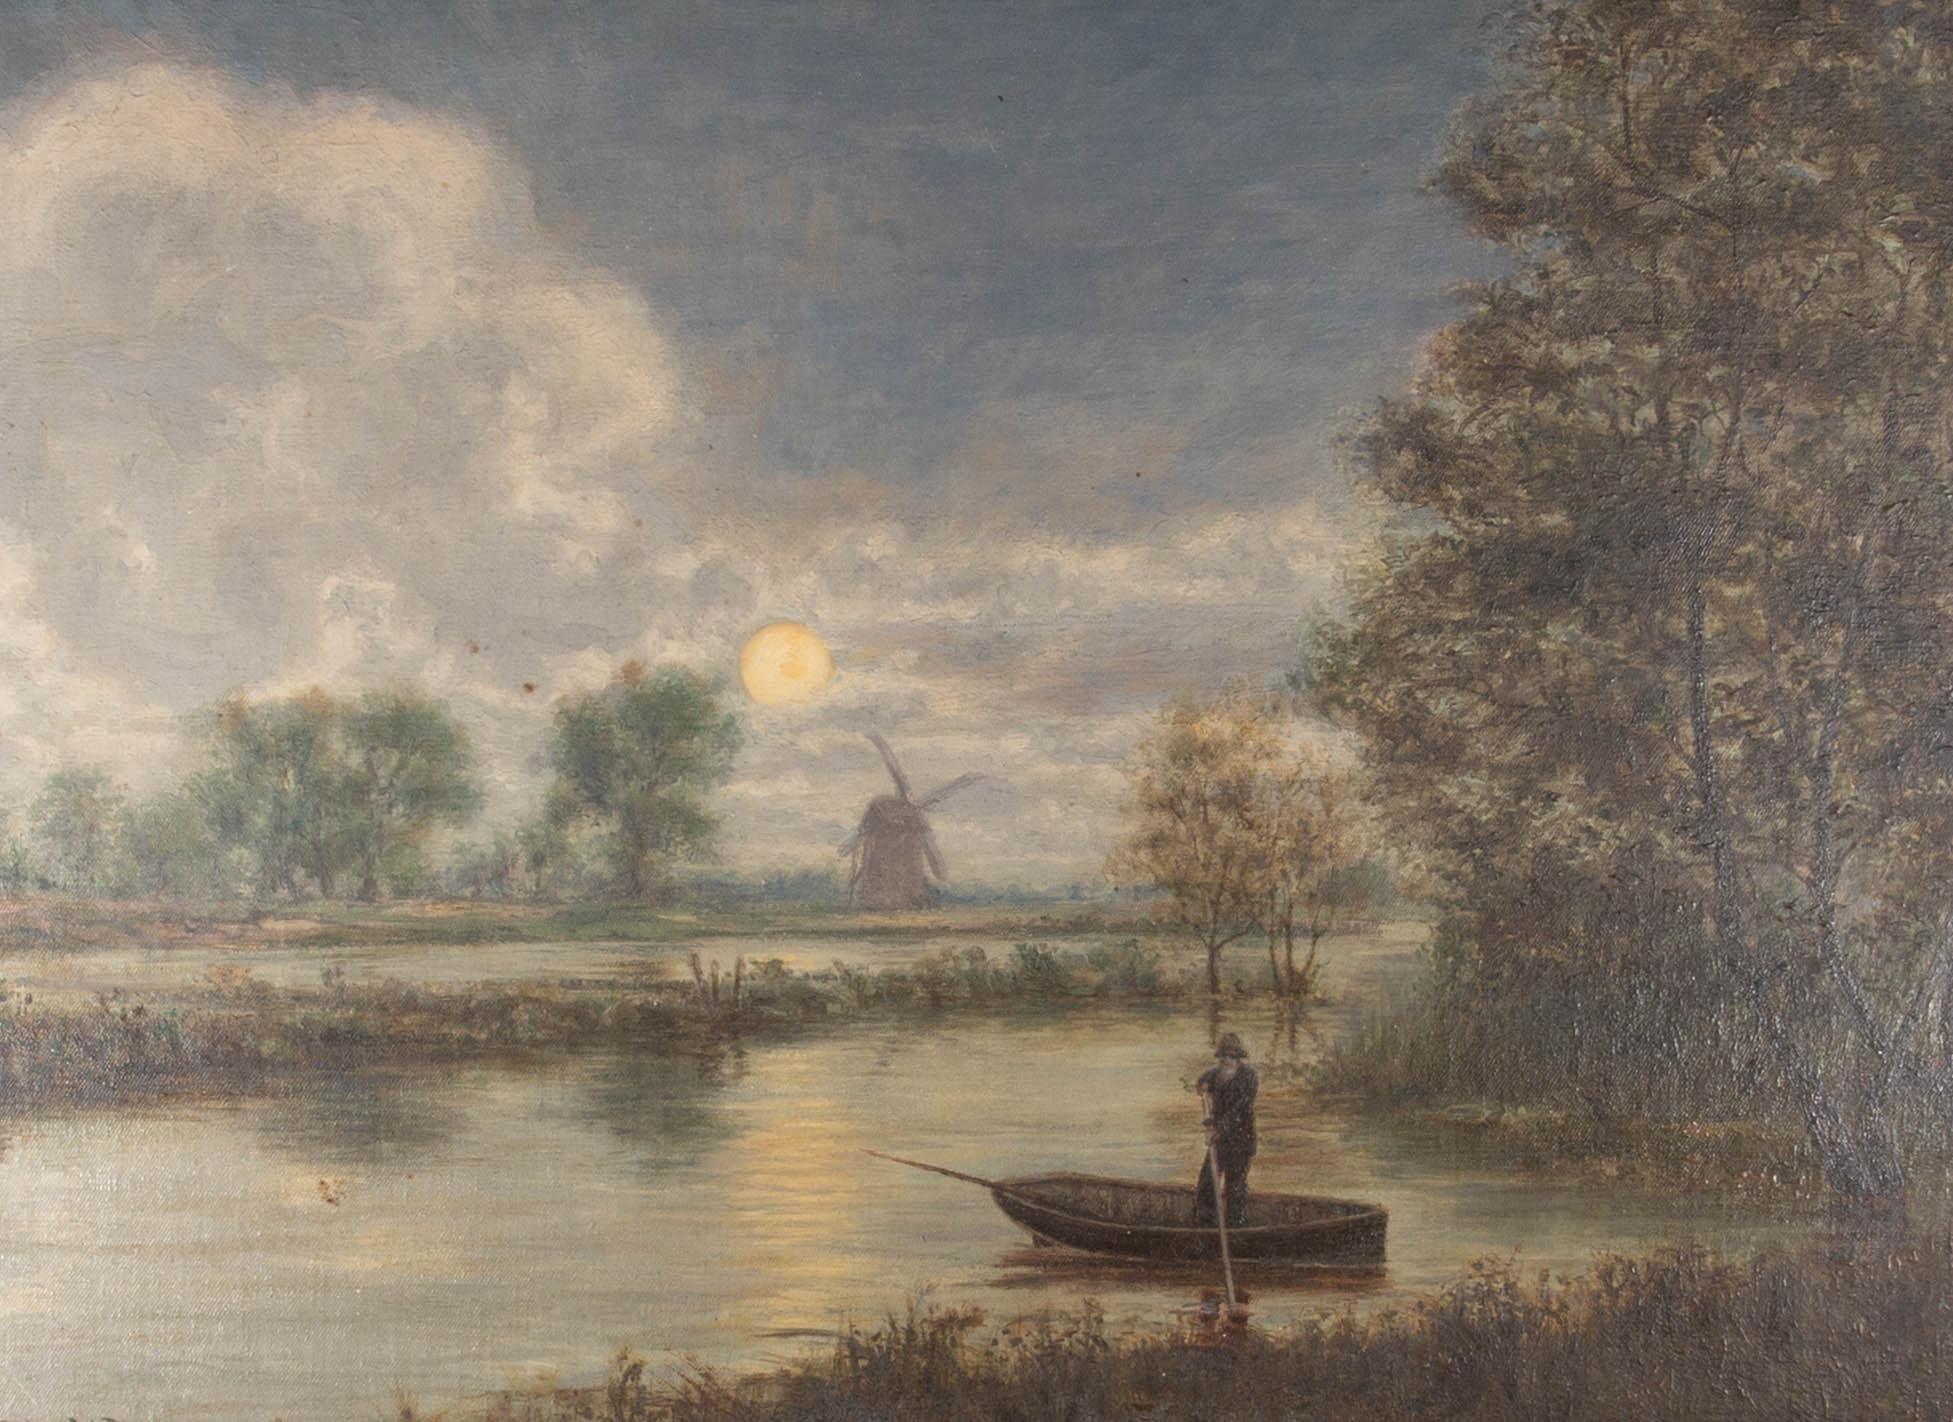 A tranquil scene depicting a man rowing across a moonlit river. In the distance a windmill can be seen on an open field. The artist has used a slight impasto effect on the trees and reeds adding texture to the foreground. Signed to the lower left.